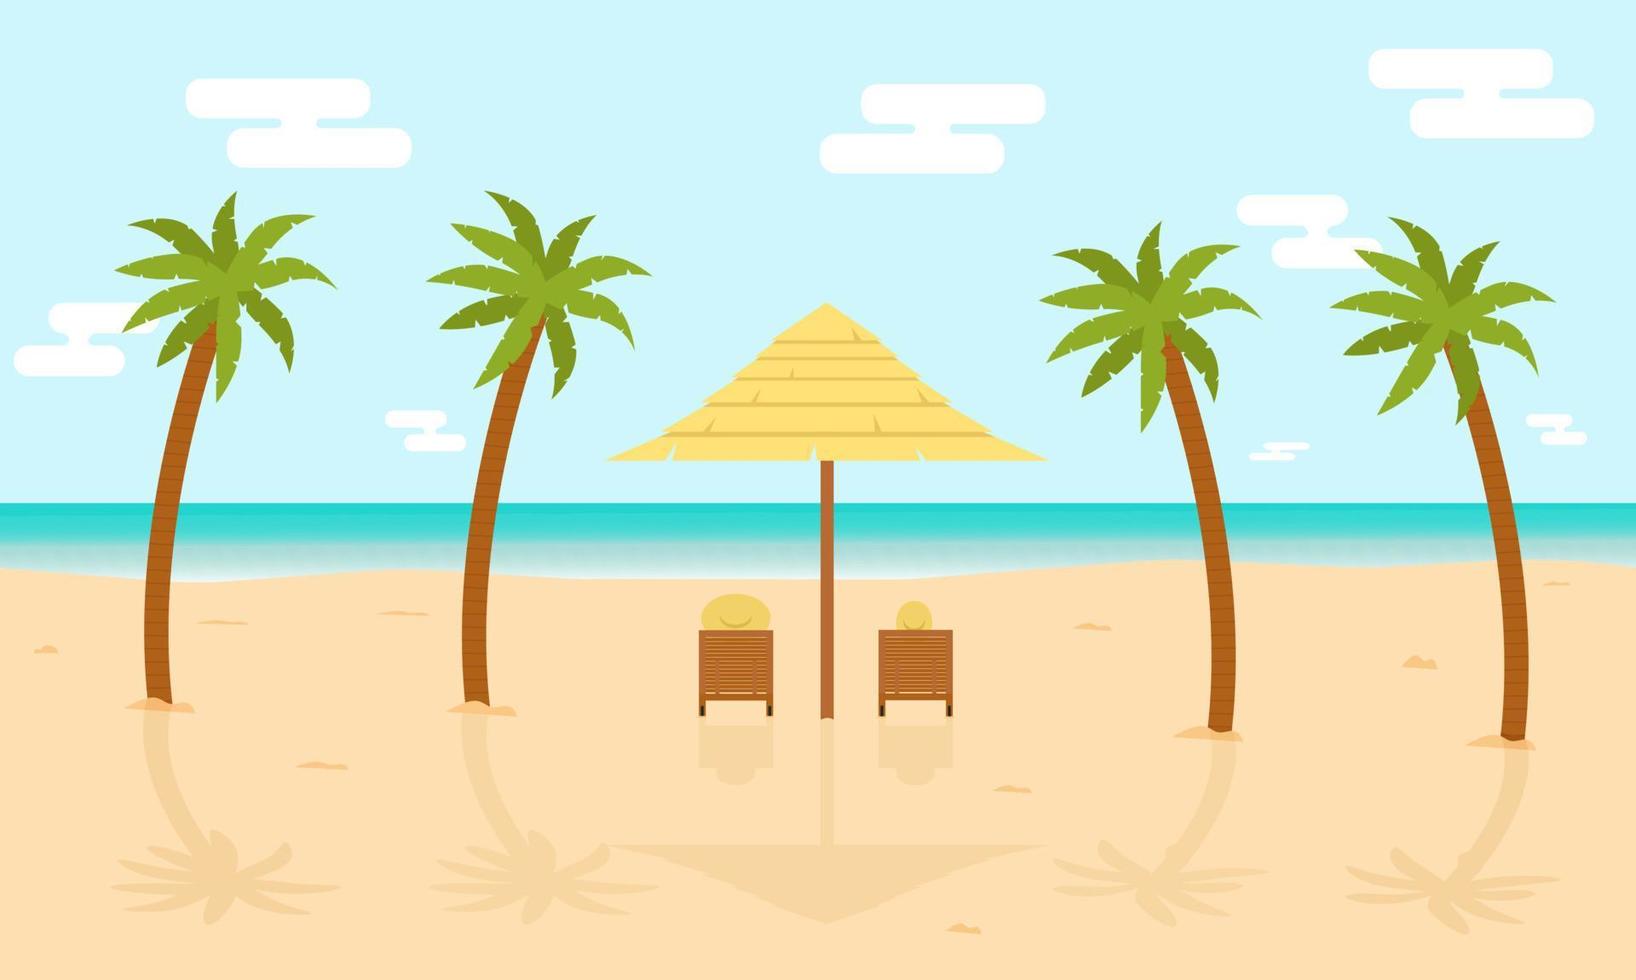 People on sun loungers relax by the sea on a deserted beach among palm trees. Cartoon. Vector illustration